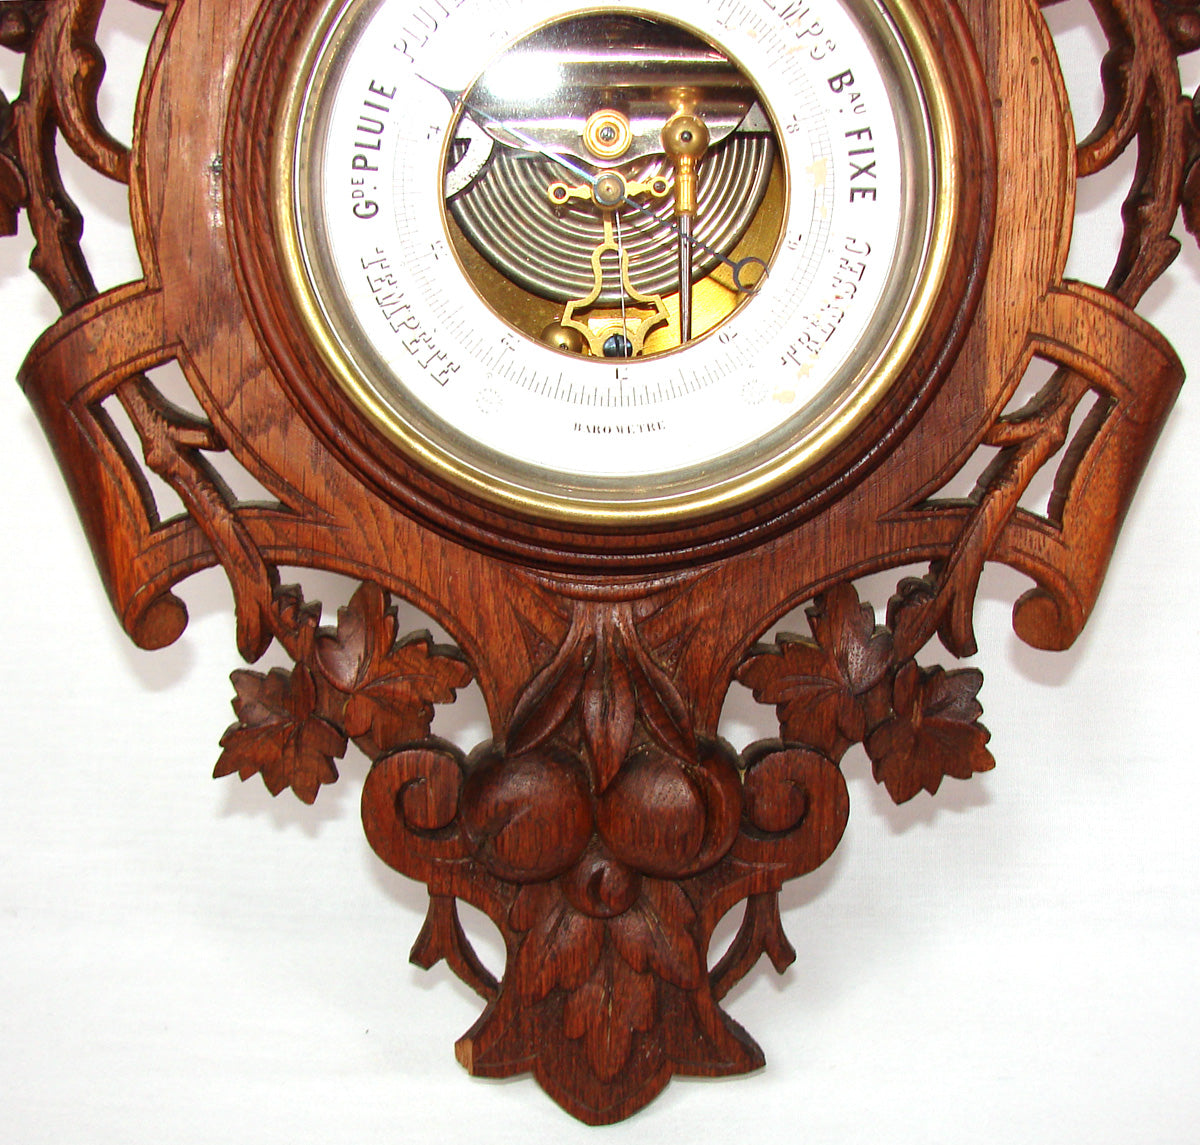 Antique Victorian Black Forest Carved Oak 27" Wall Barometer & Thermometer, Game Birds & Wild Boar